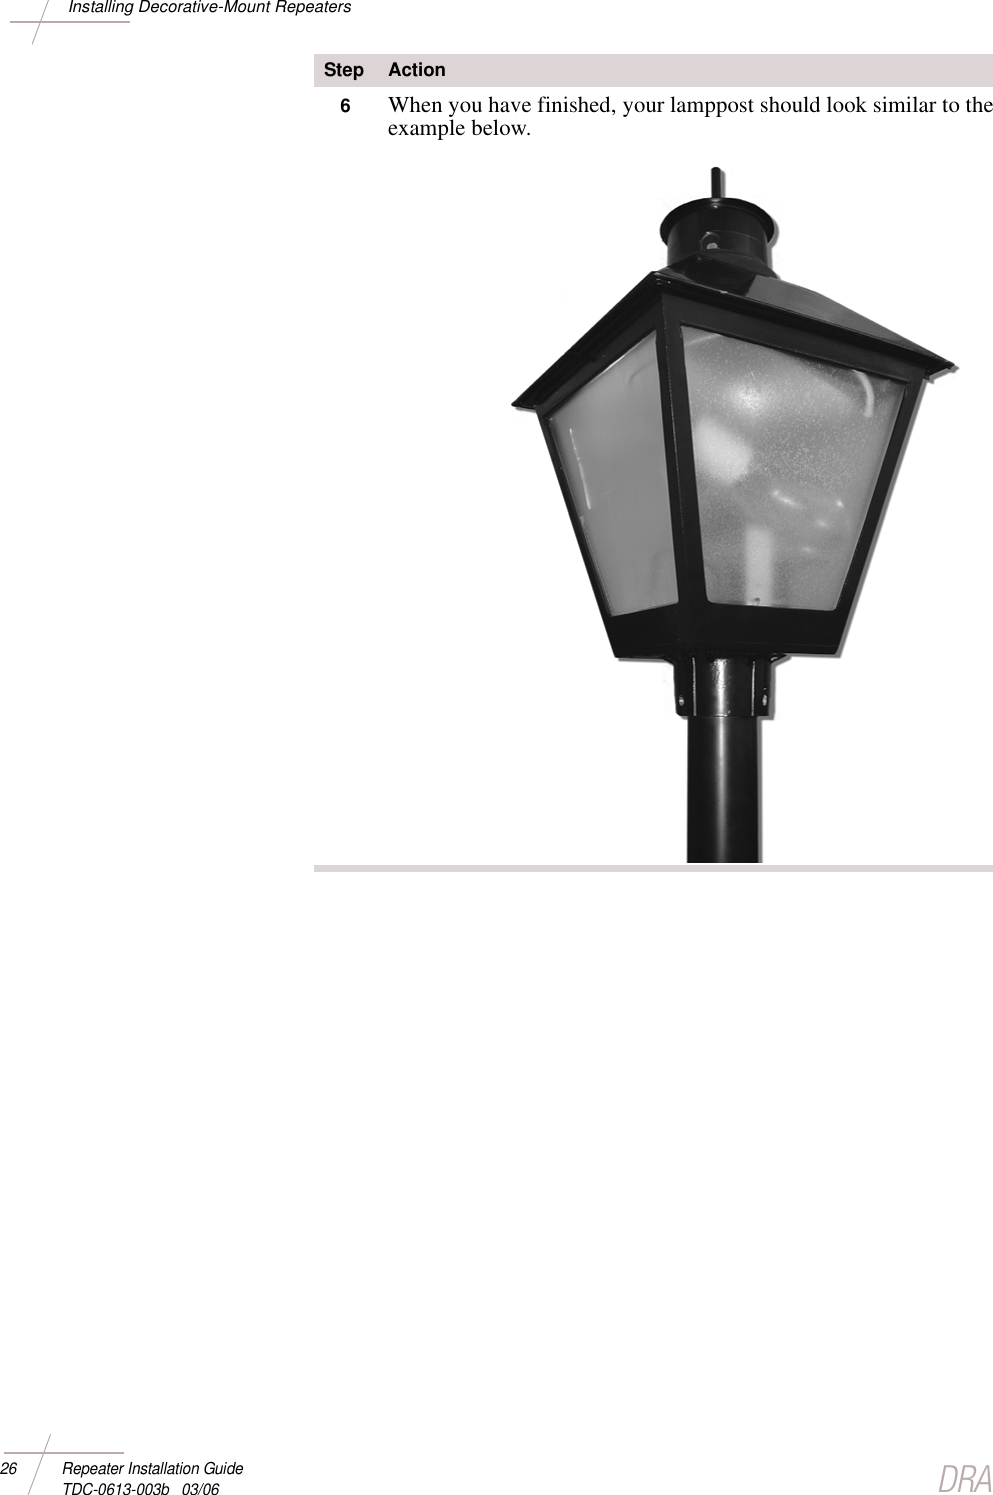 DRAFT26 Repeater Installation Guide TDC-0613-003b   03/06Installing Decorative-Mount Repeaters6When you have finished, your lamppost should look similar to the example below. Step Action